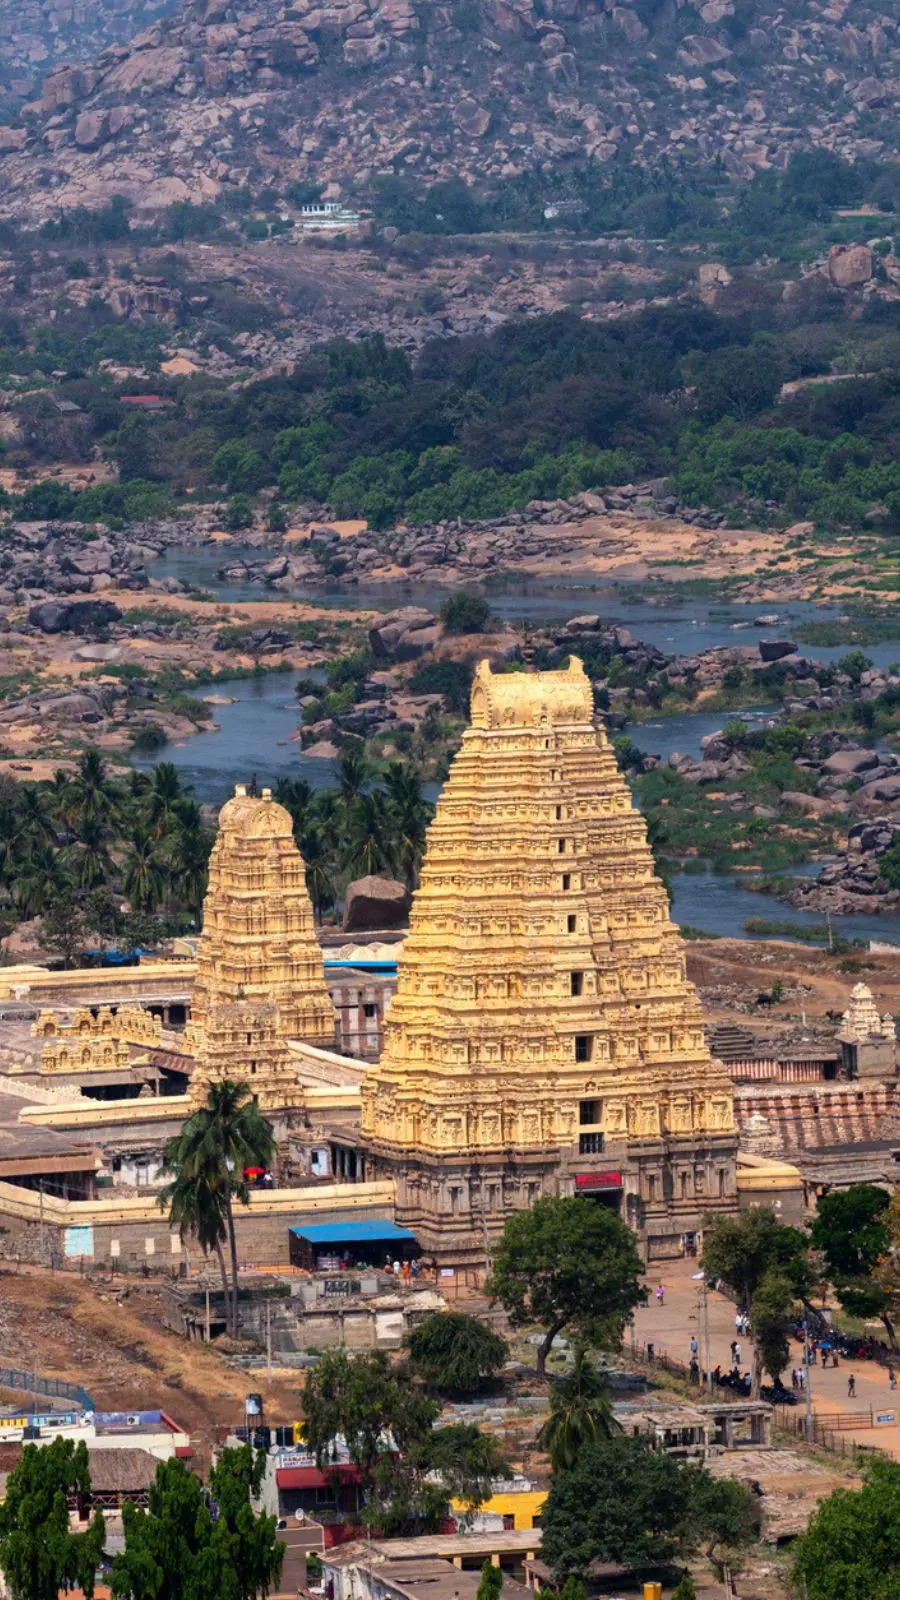 Explore the historical ruins of Hampi after a scenic drive through rural Karnataka, passing by picturesque landscapes and ancient temples.